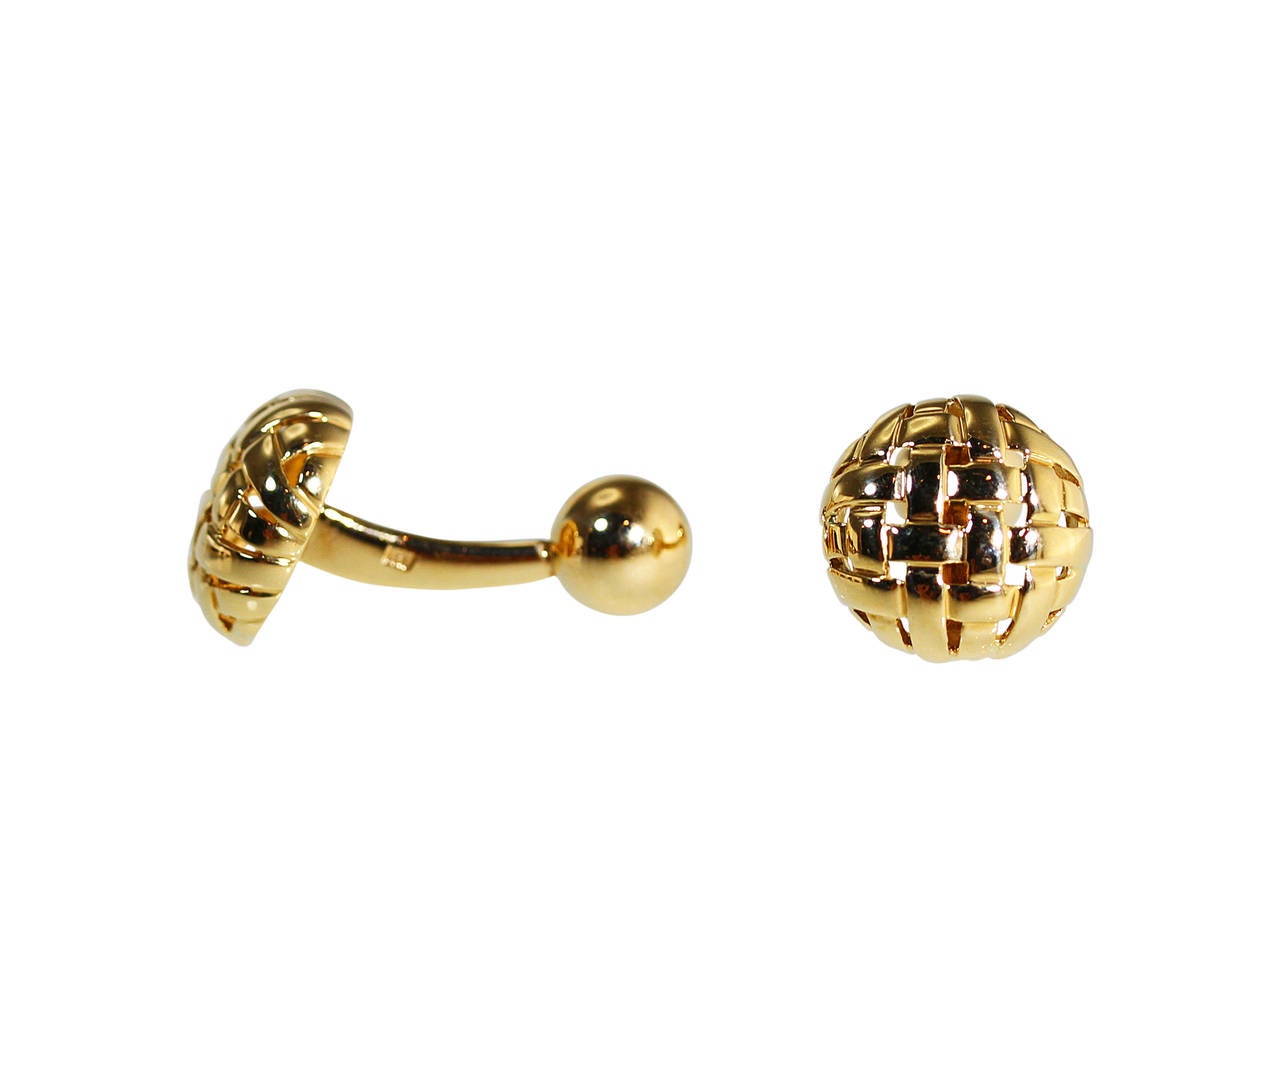 A pair of 18 karat yellow gold weave cufflinks by Tiffany & Co., 1995, the teriminals designed as polished gold woven circles, gross weight 12.3 grams, measuring 1 1/8 by 5/8 inches, signed T & Co., c 1995, stamped 750, with signed pouch.